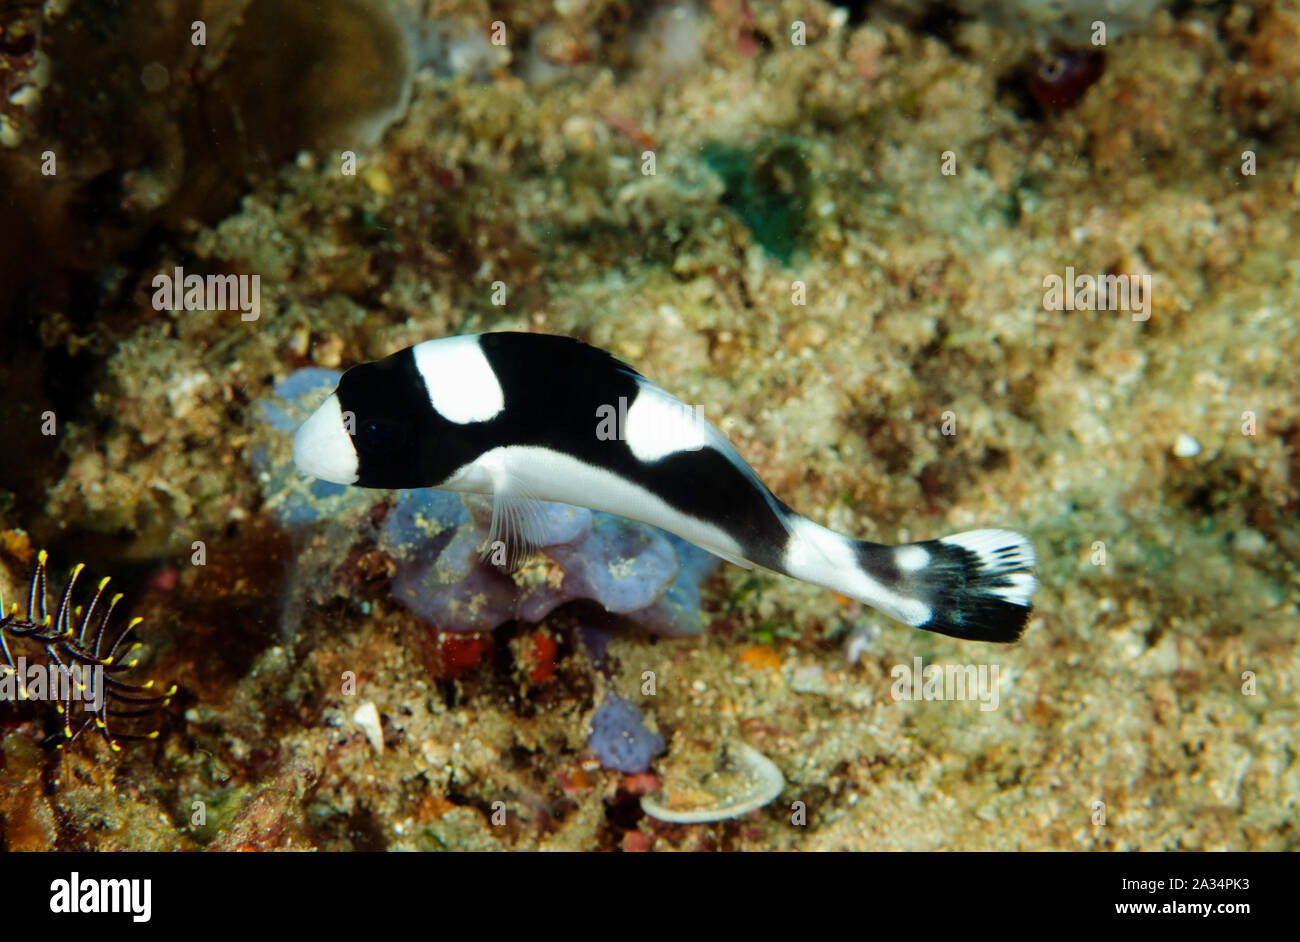 Juvenile dotted sweetlips, Plectorhinchus picus, Sulawesi Indonesia. Stock Photo